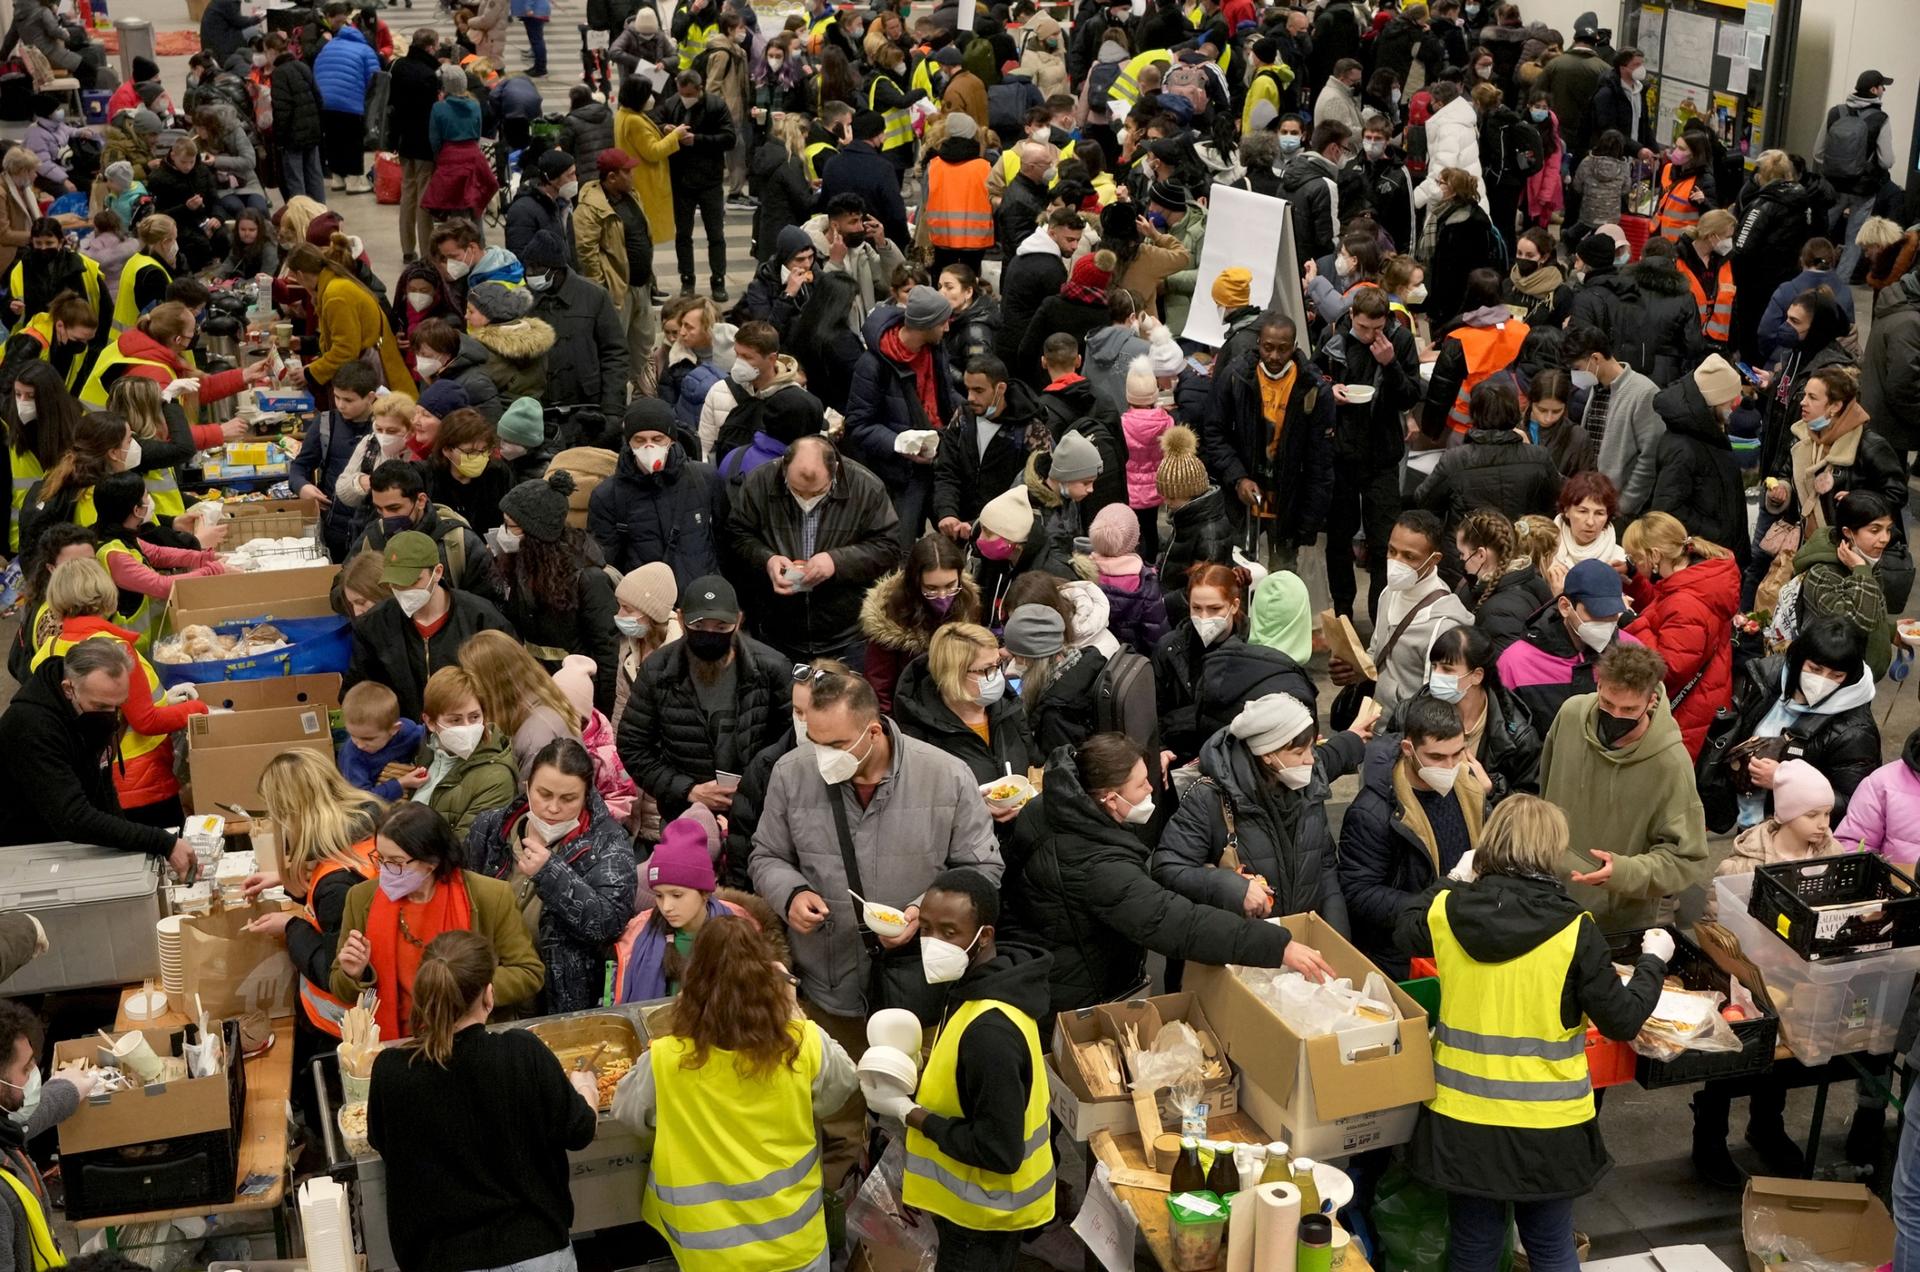 Ukrainian refugees queue for food in the welcome area after their arrival at the main train station in Berlin, Germany, Tuesday, March 8, 2022.